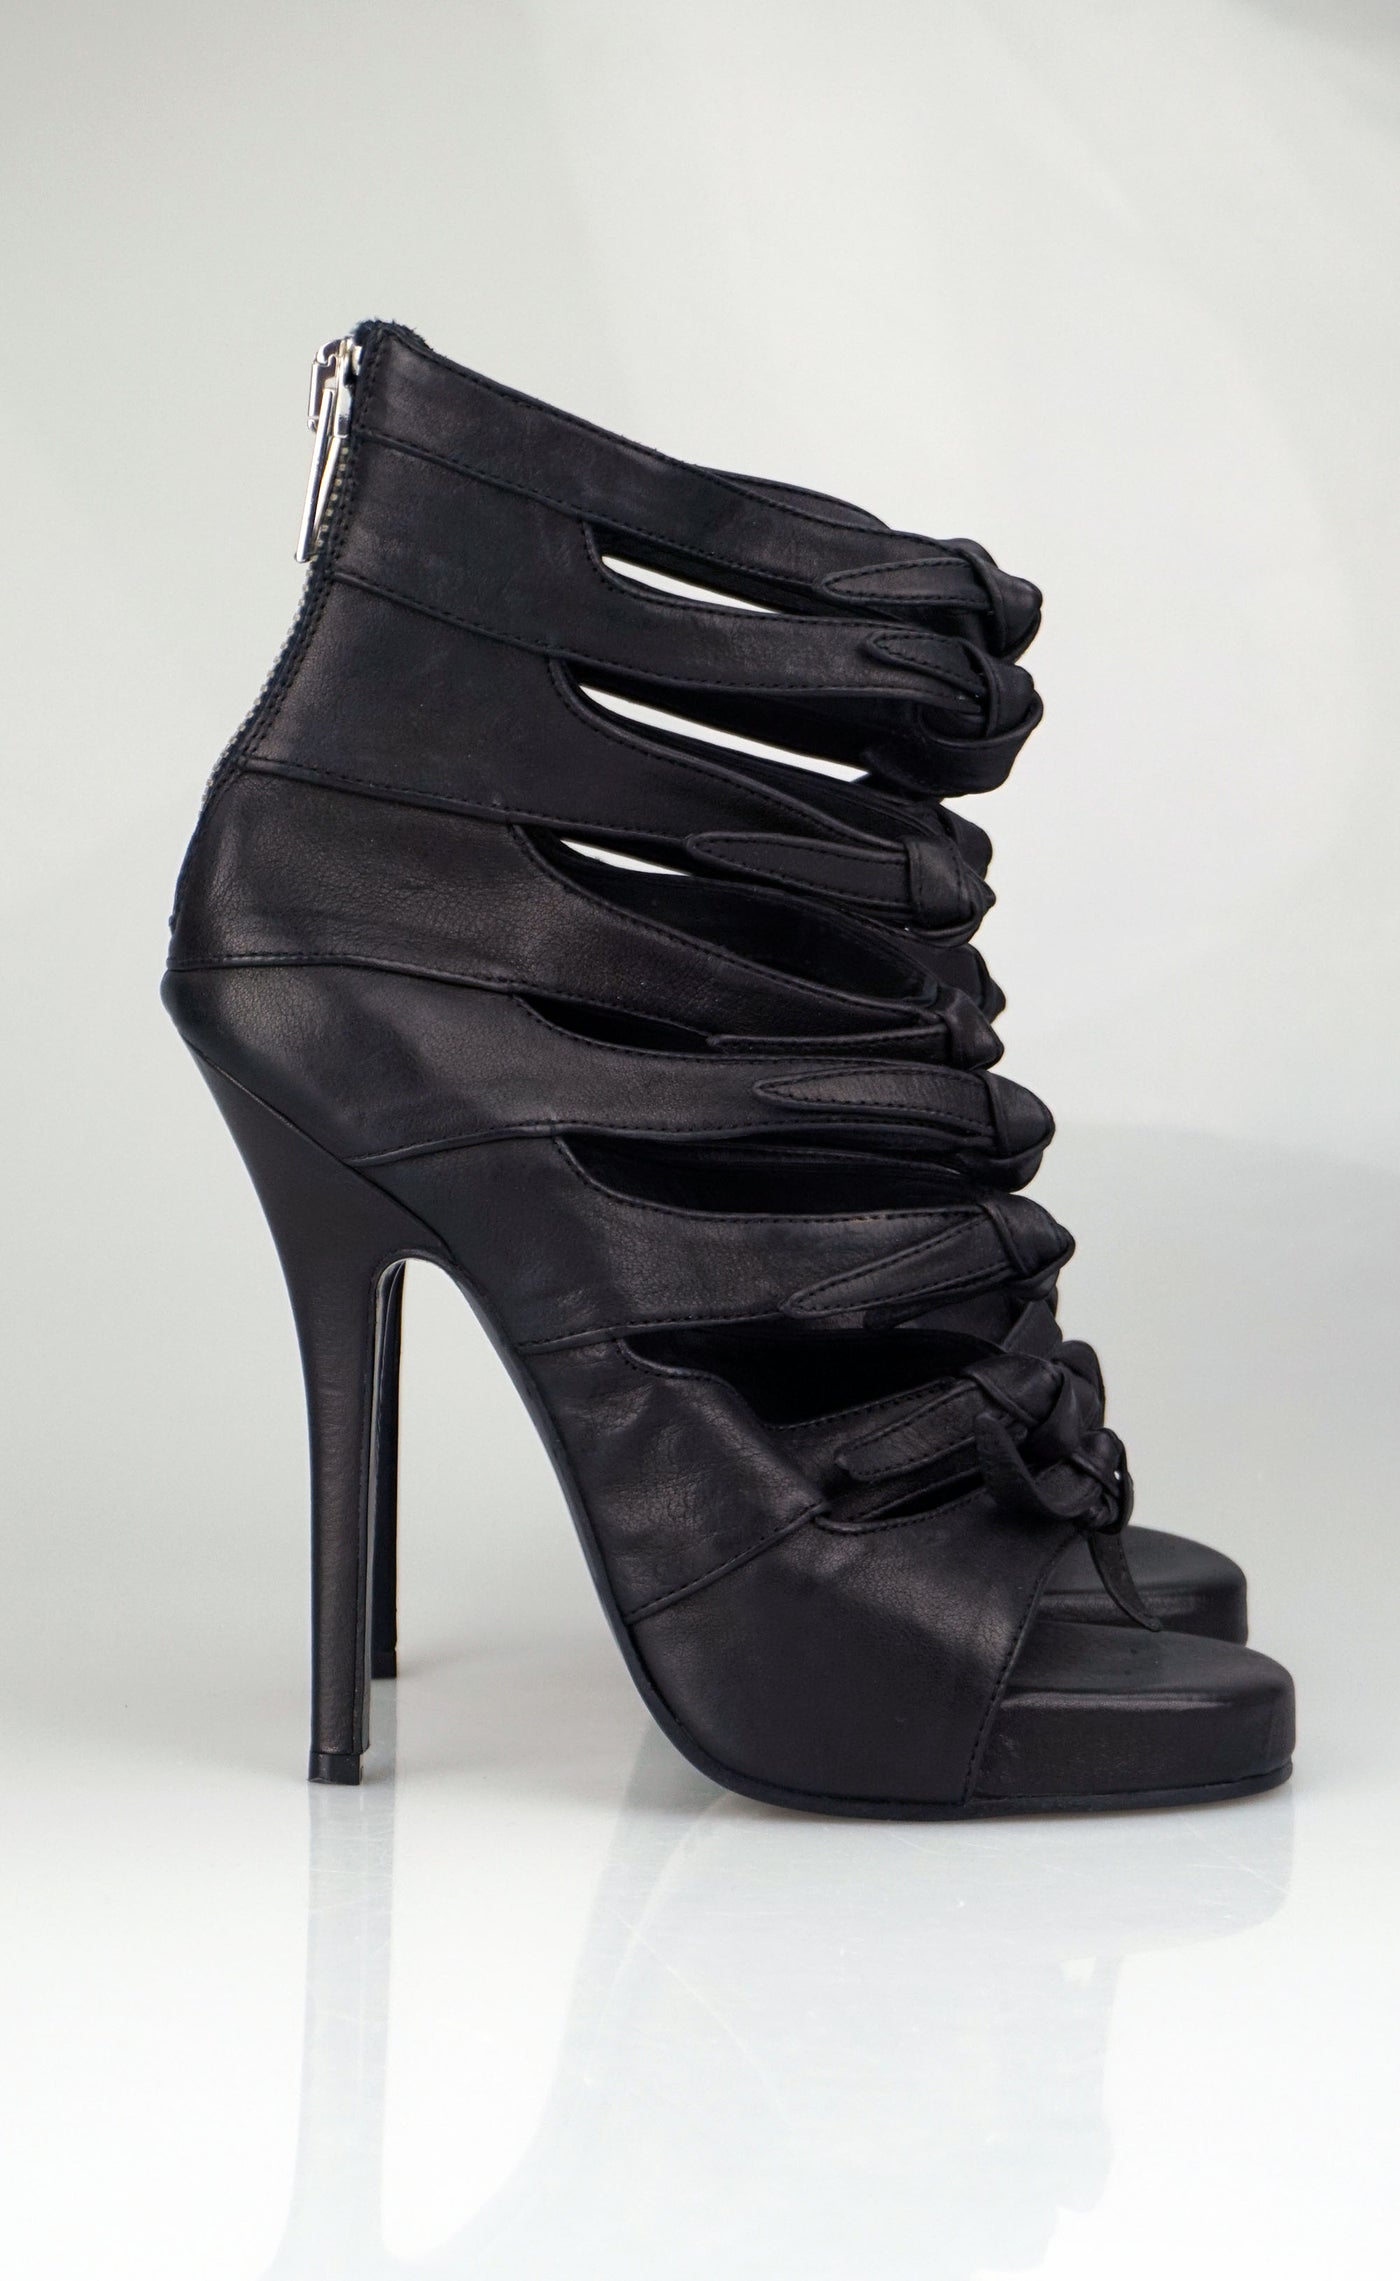 Knotted cage heels